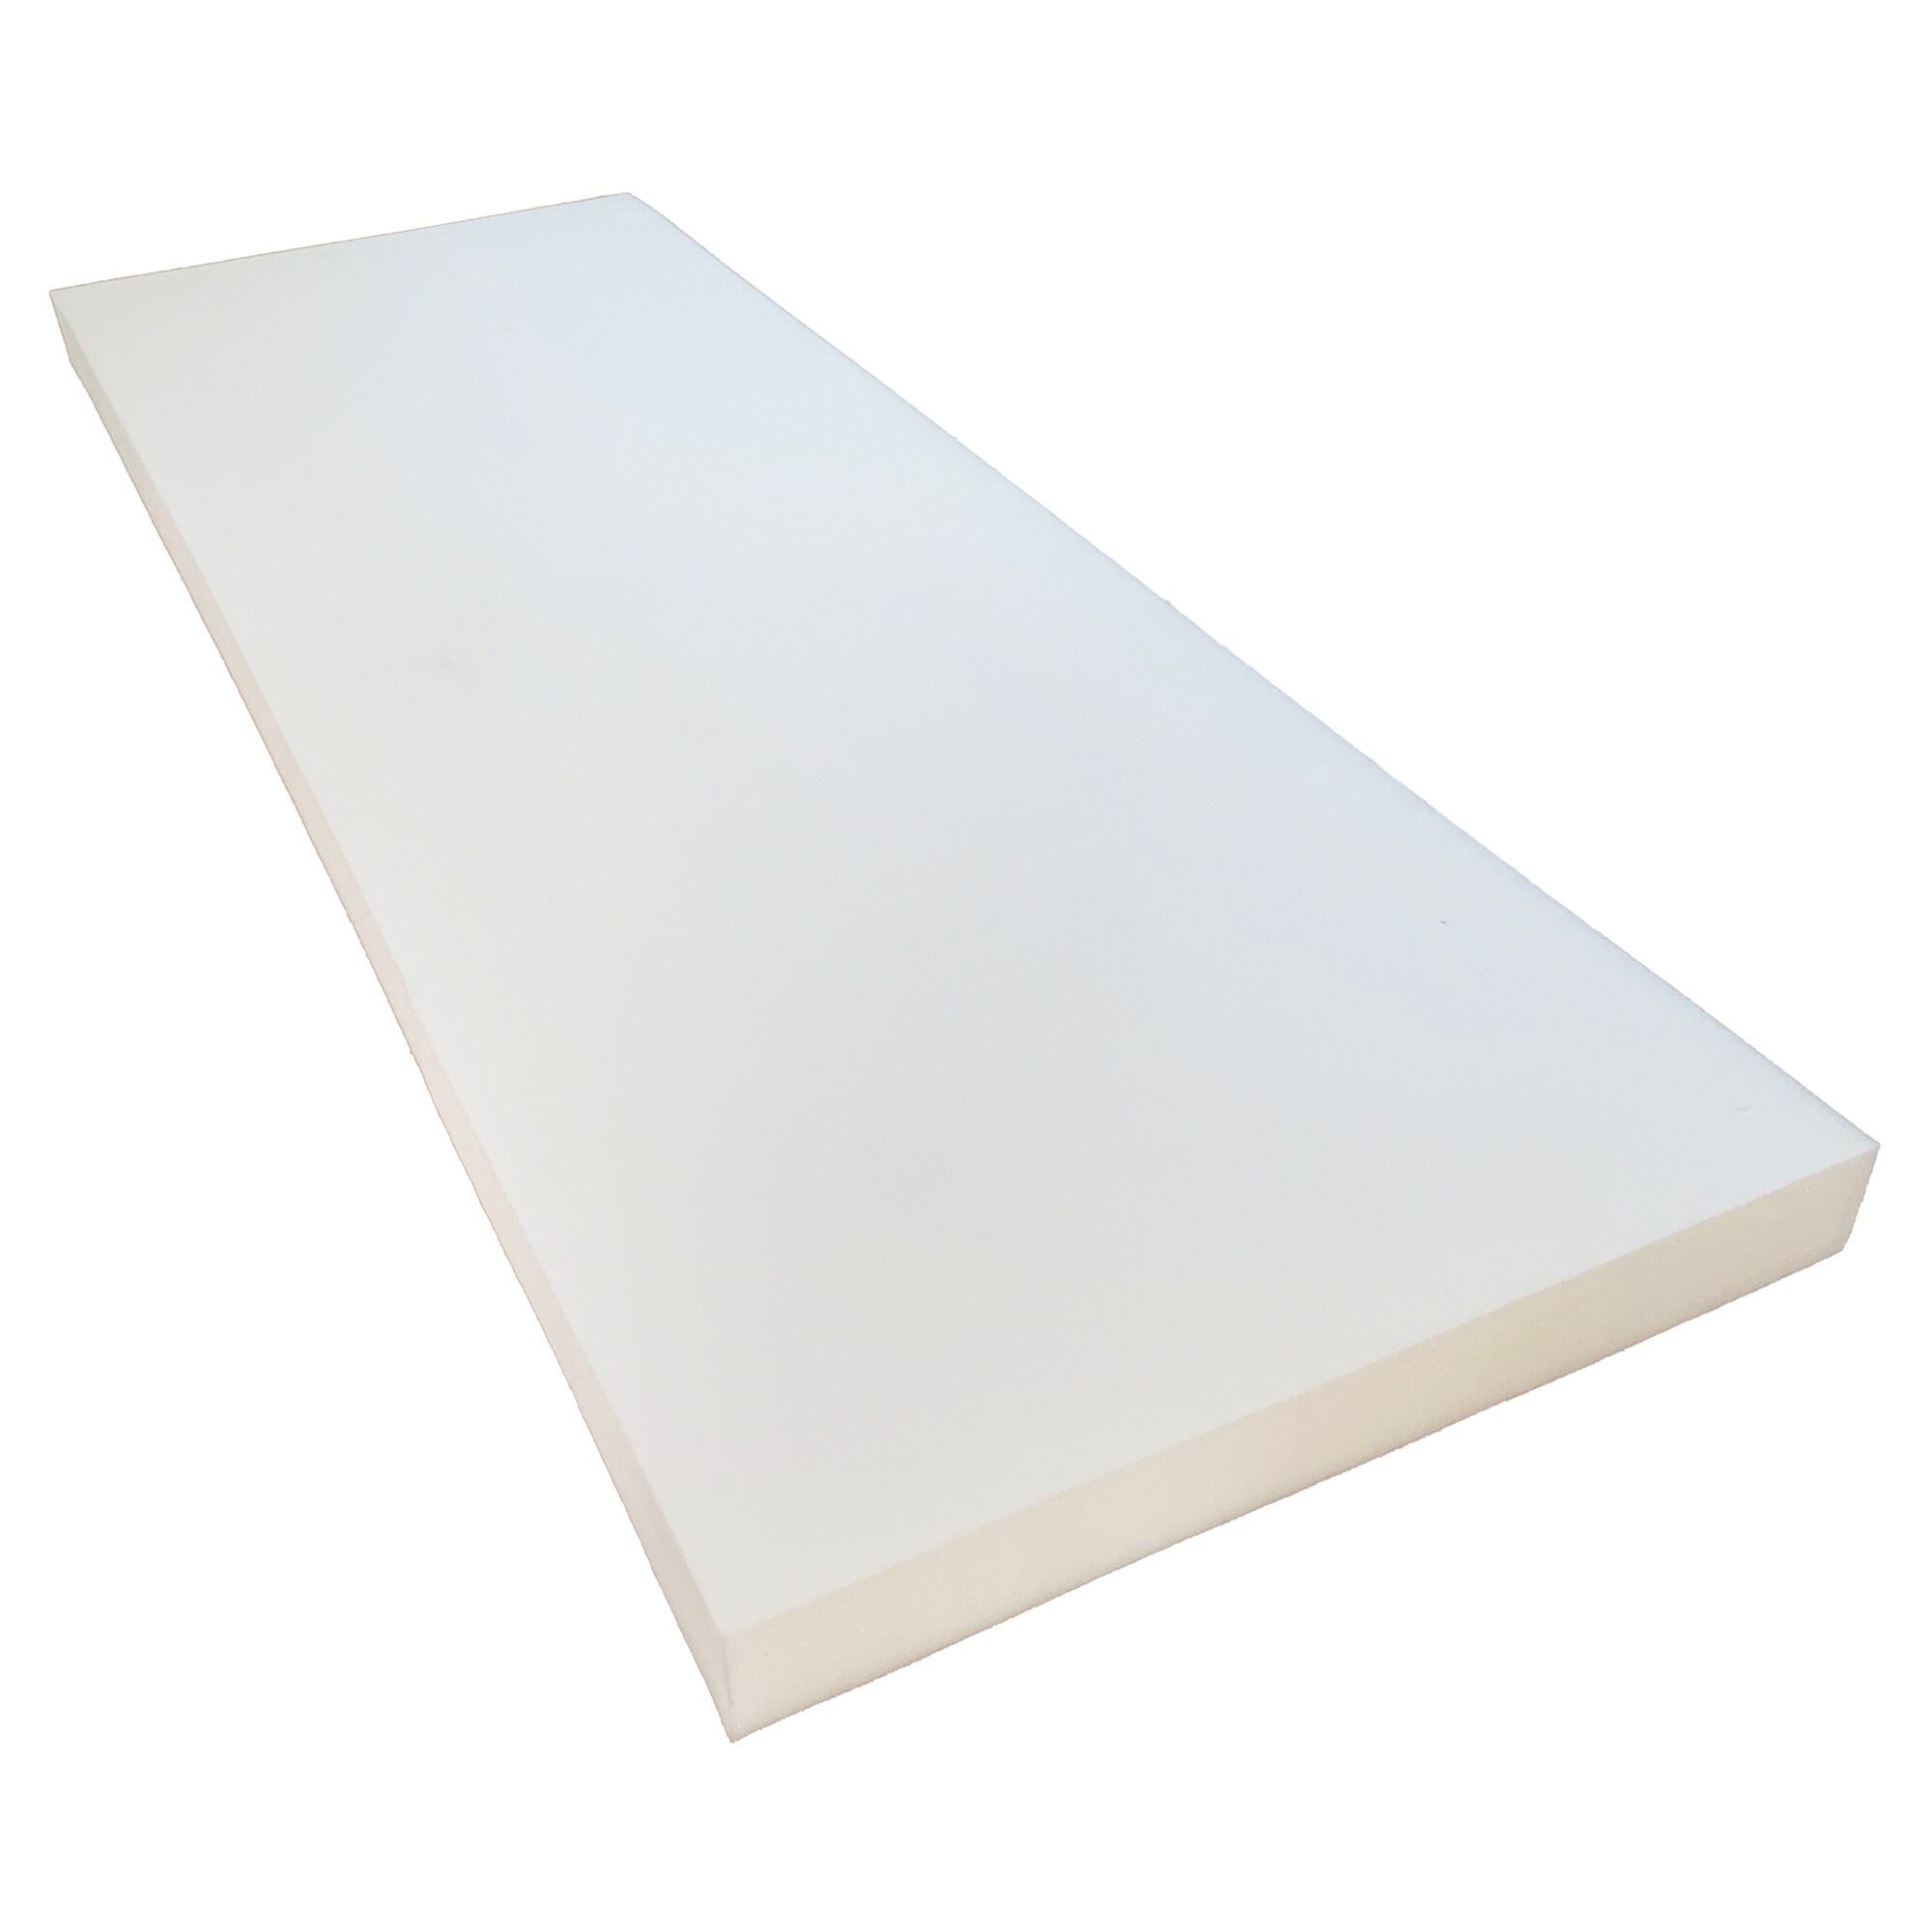 DURAFOAM™ DF155W Sizes and shape in the sent message 2 Pieces 3" thickness 